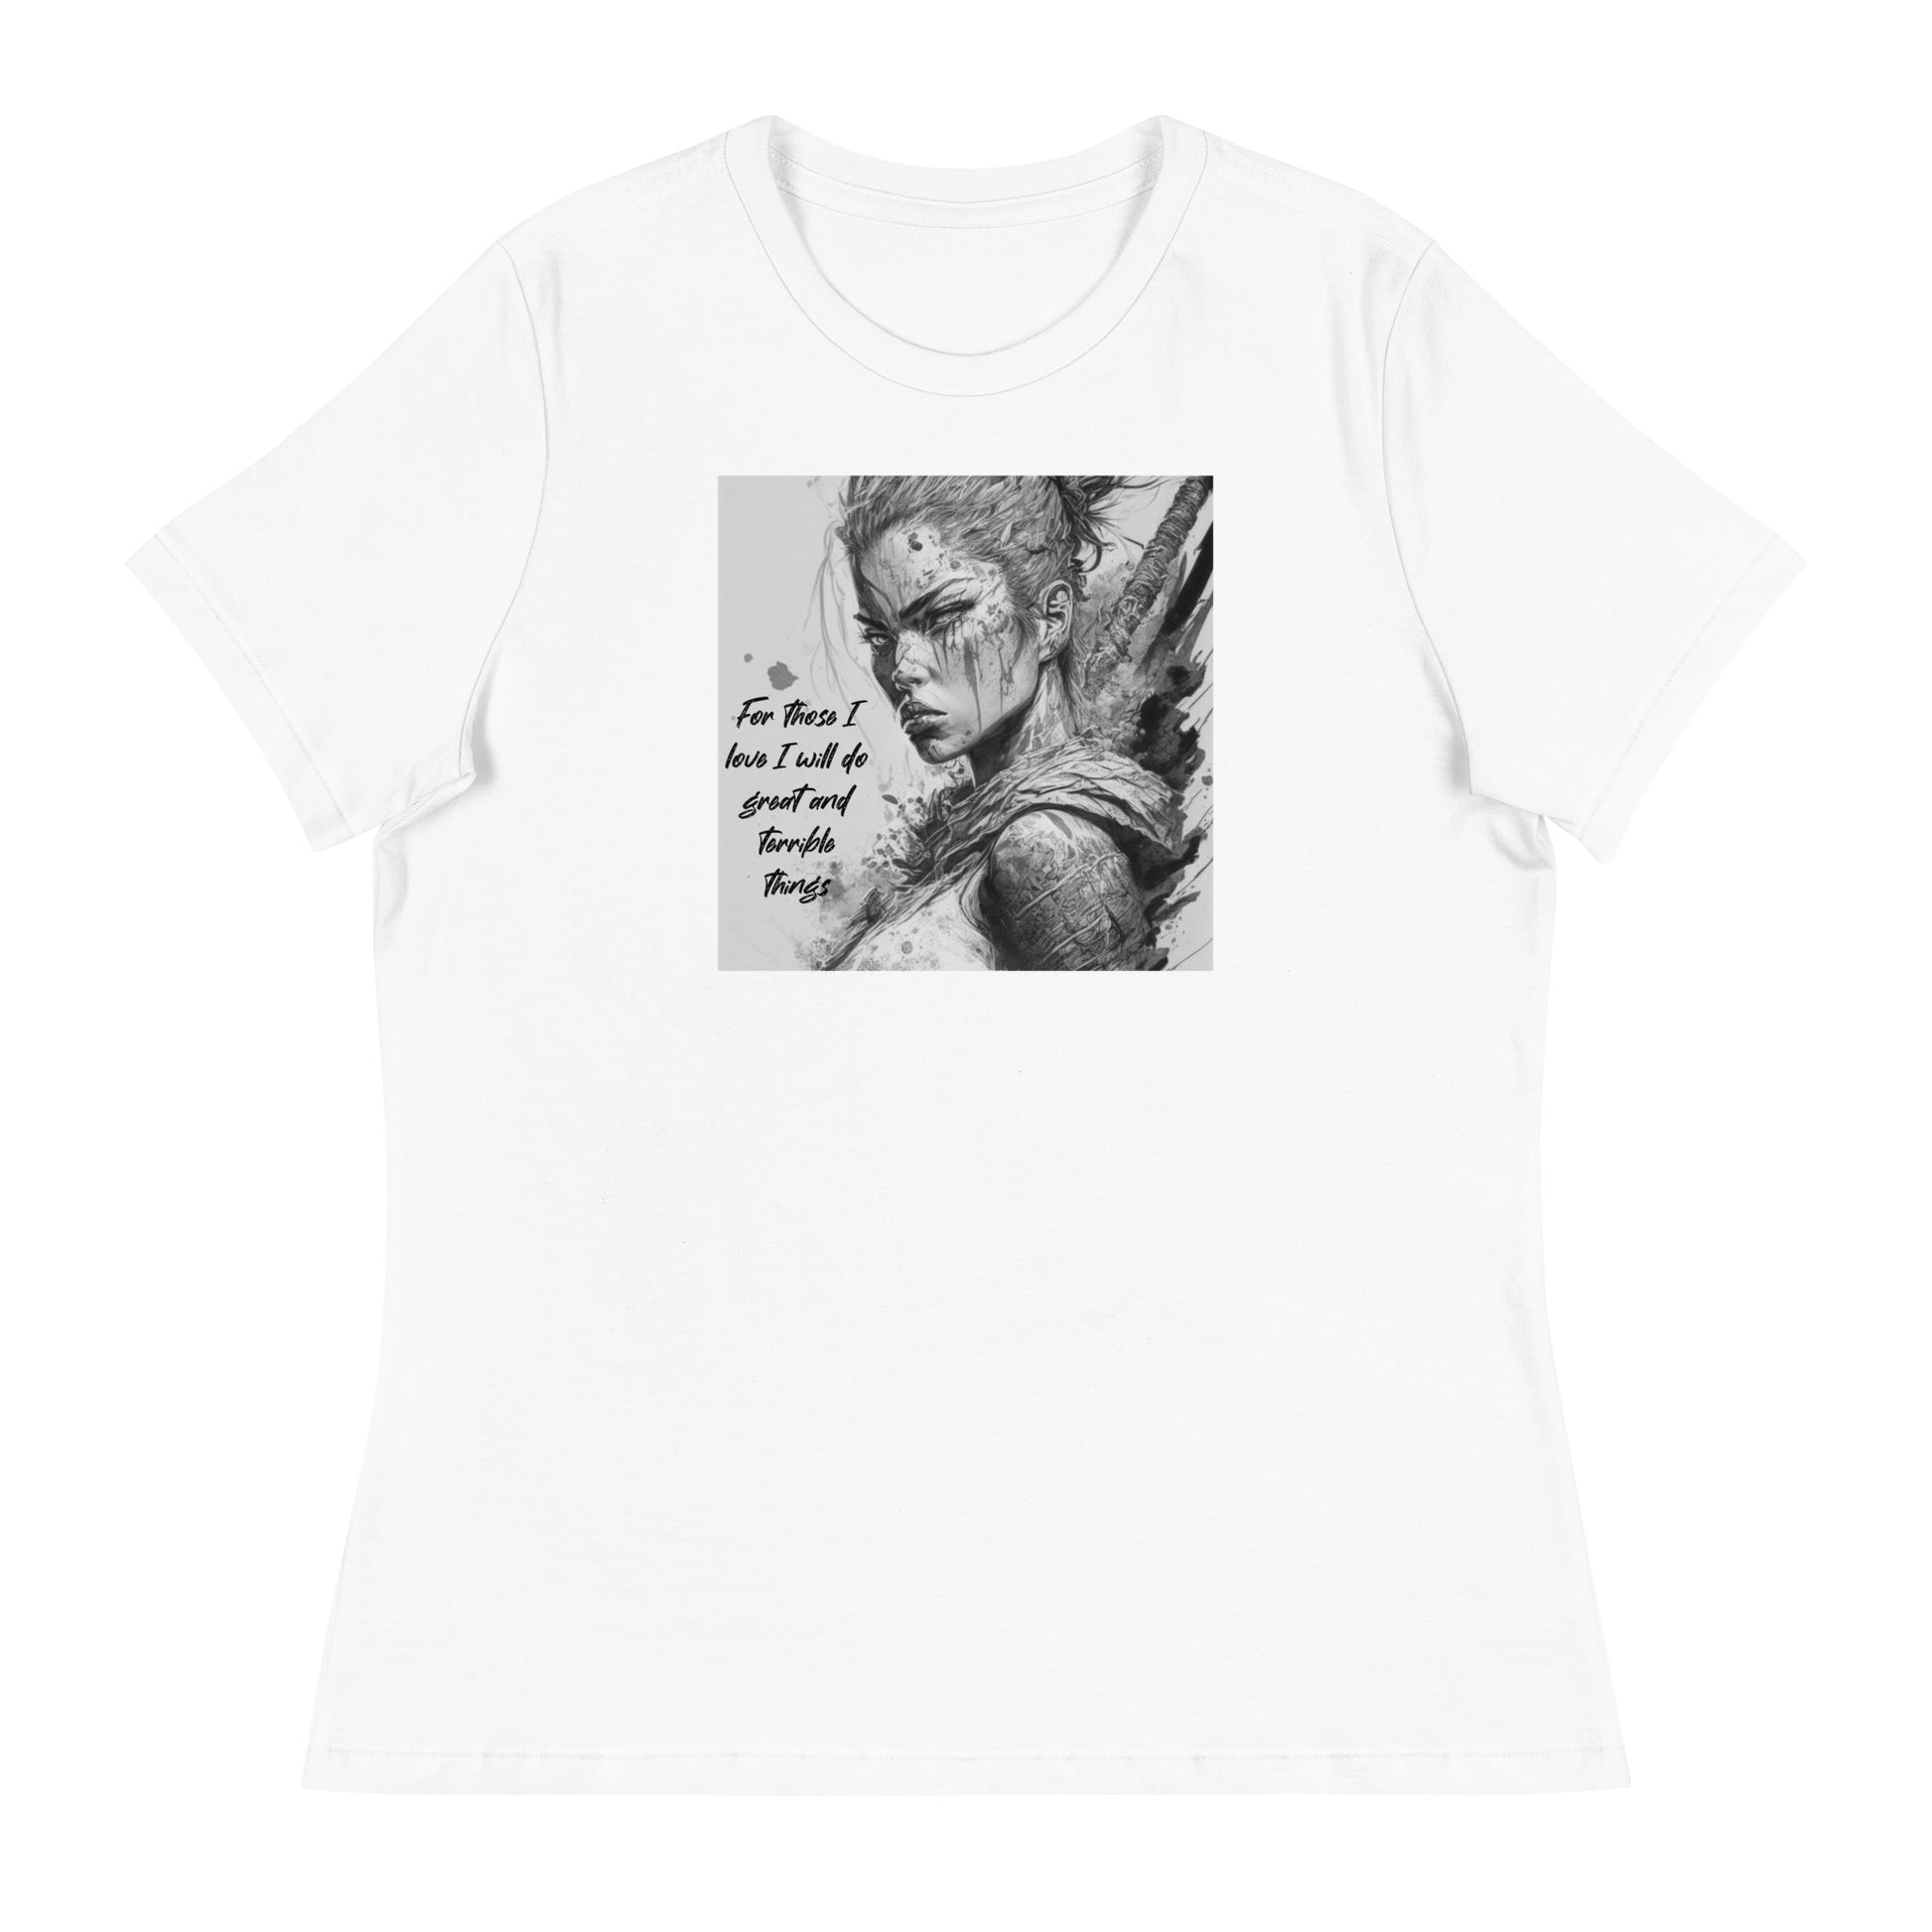 Great and Terrible Things Women's Graphic T-Shirt White